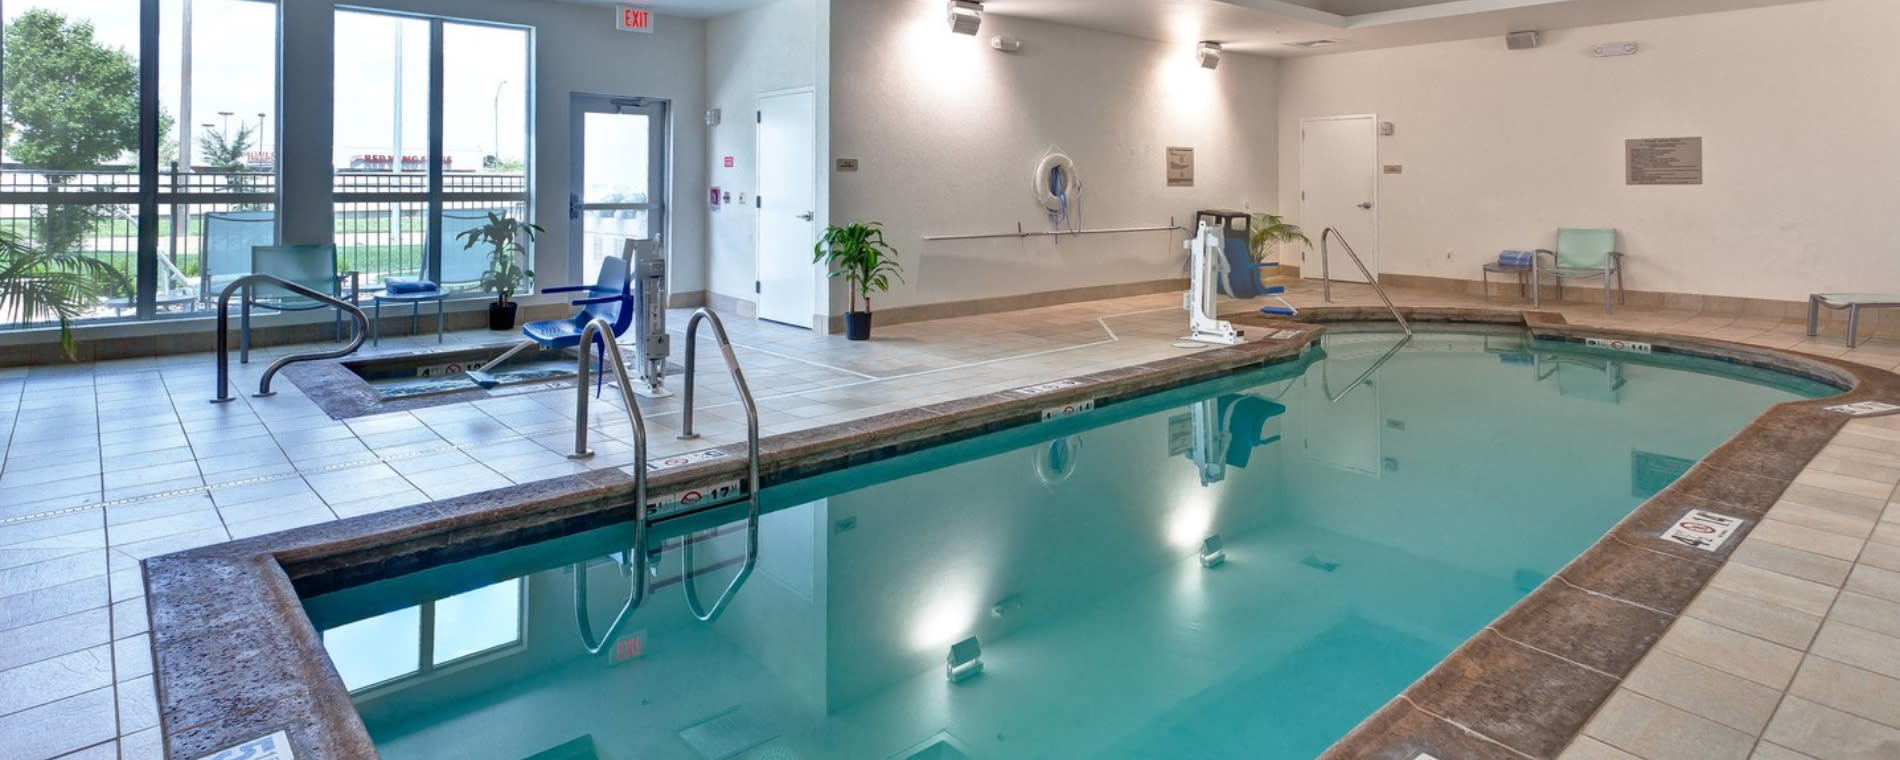 Springhill Suites by Marriott Wichita Airport Pool